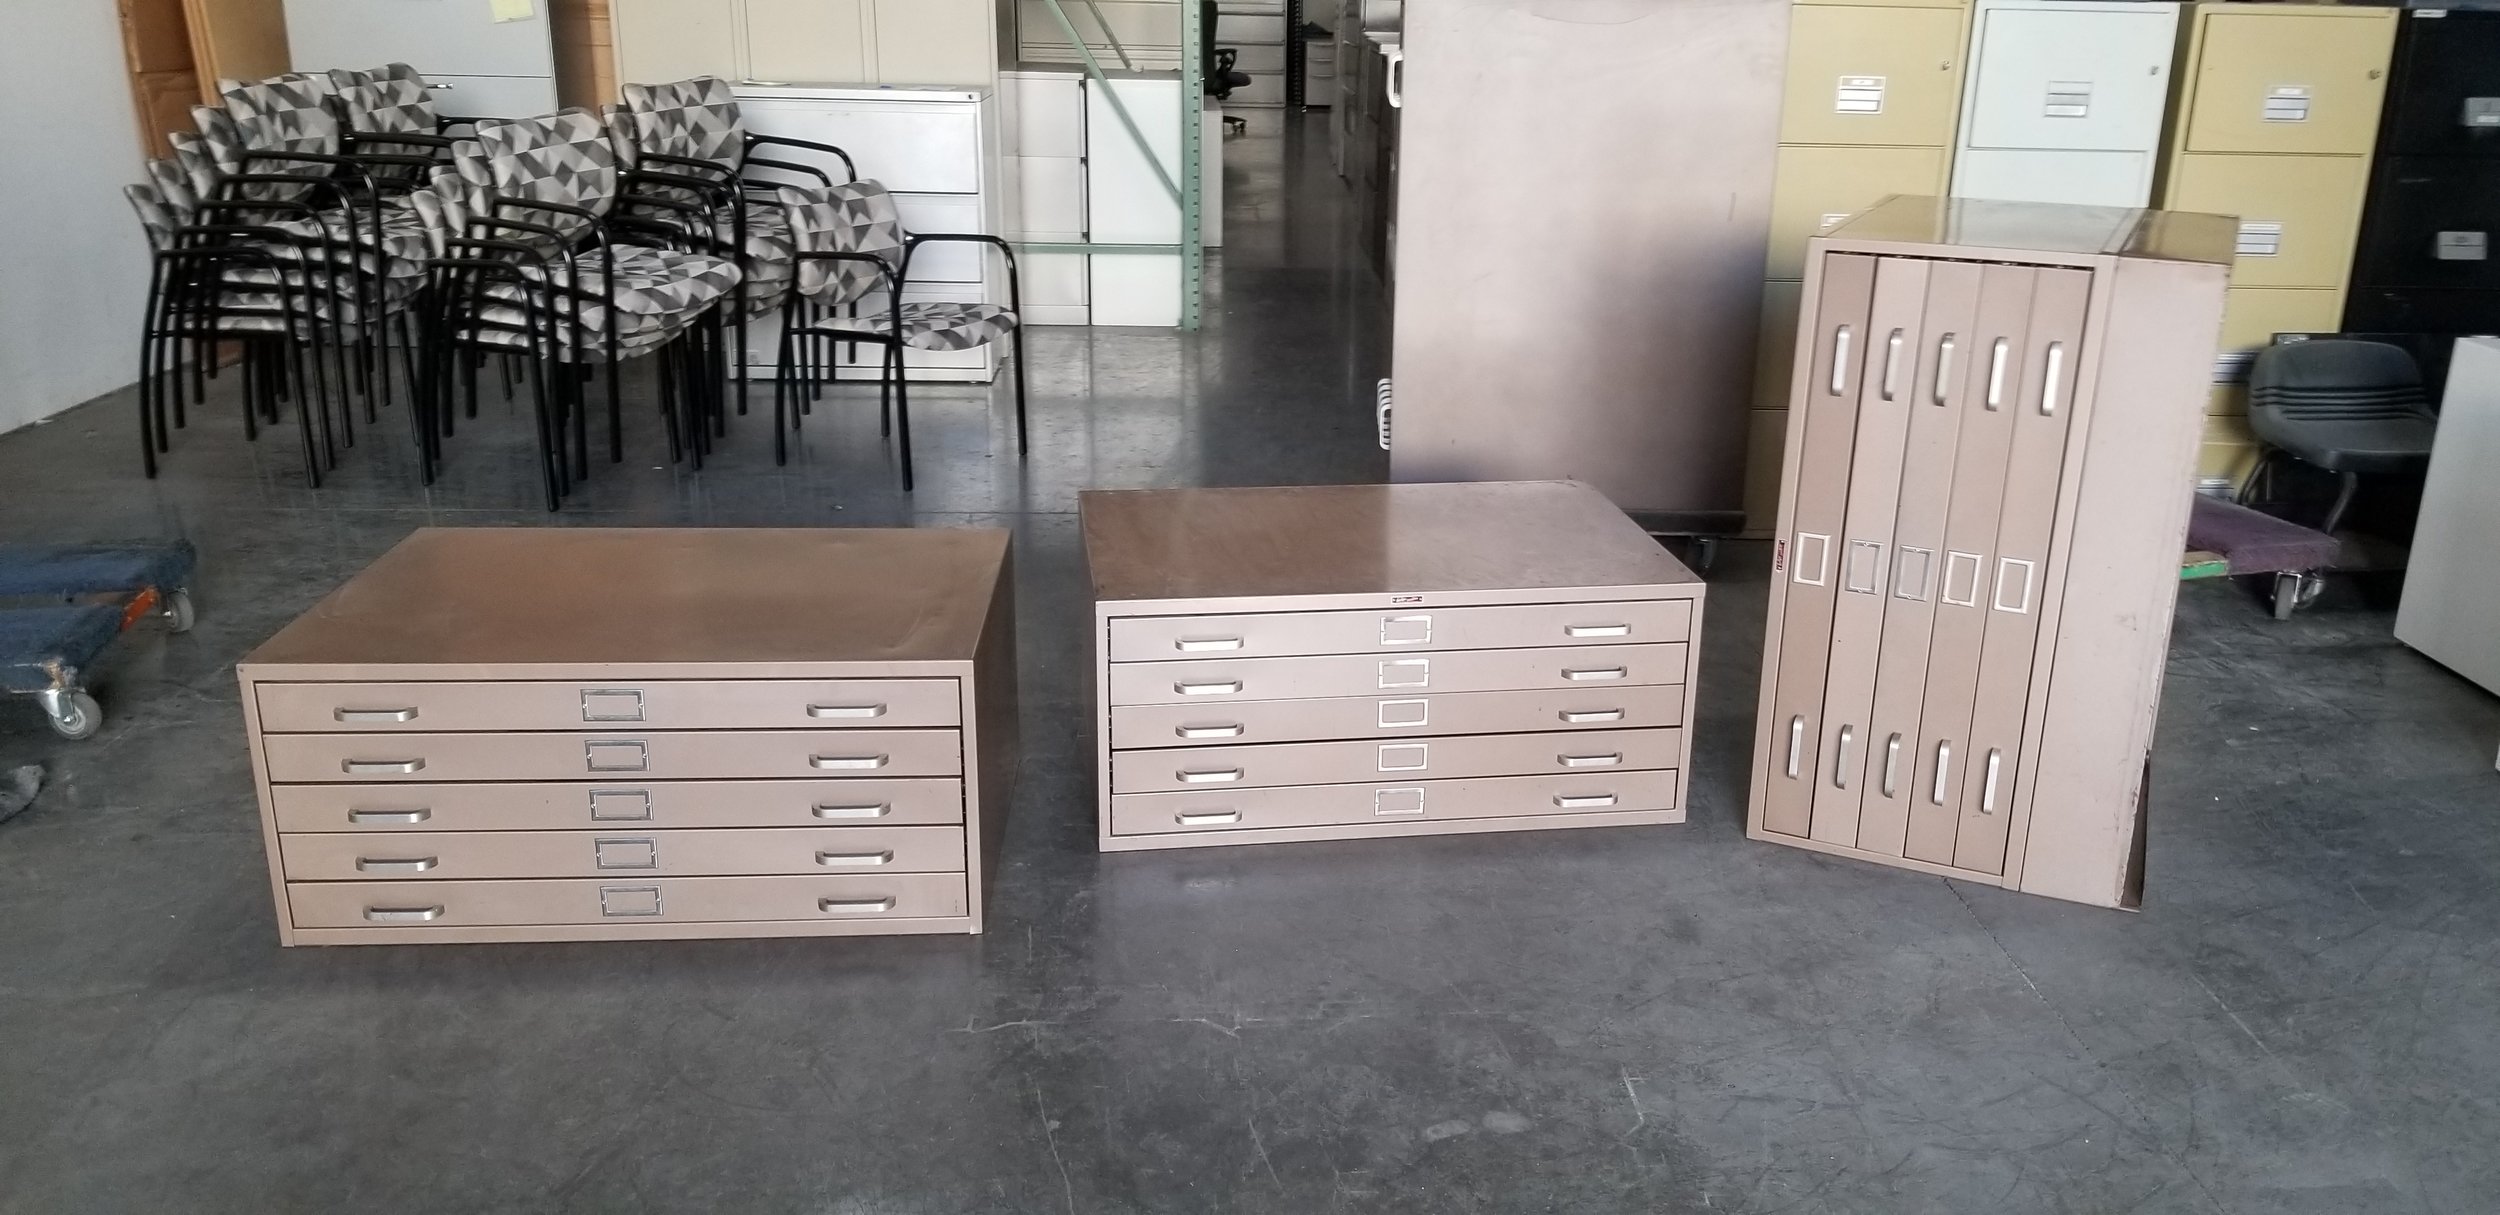 Flat Files, Flat File Cabinets, Blueprint Storage Cabinet in Stock